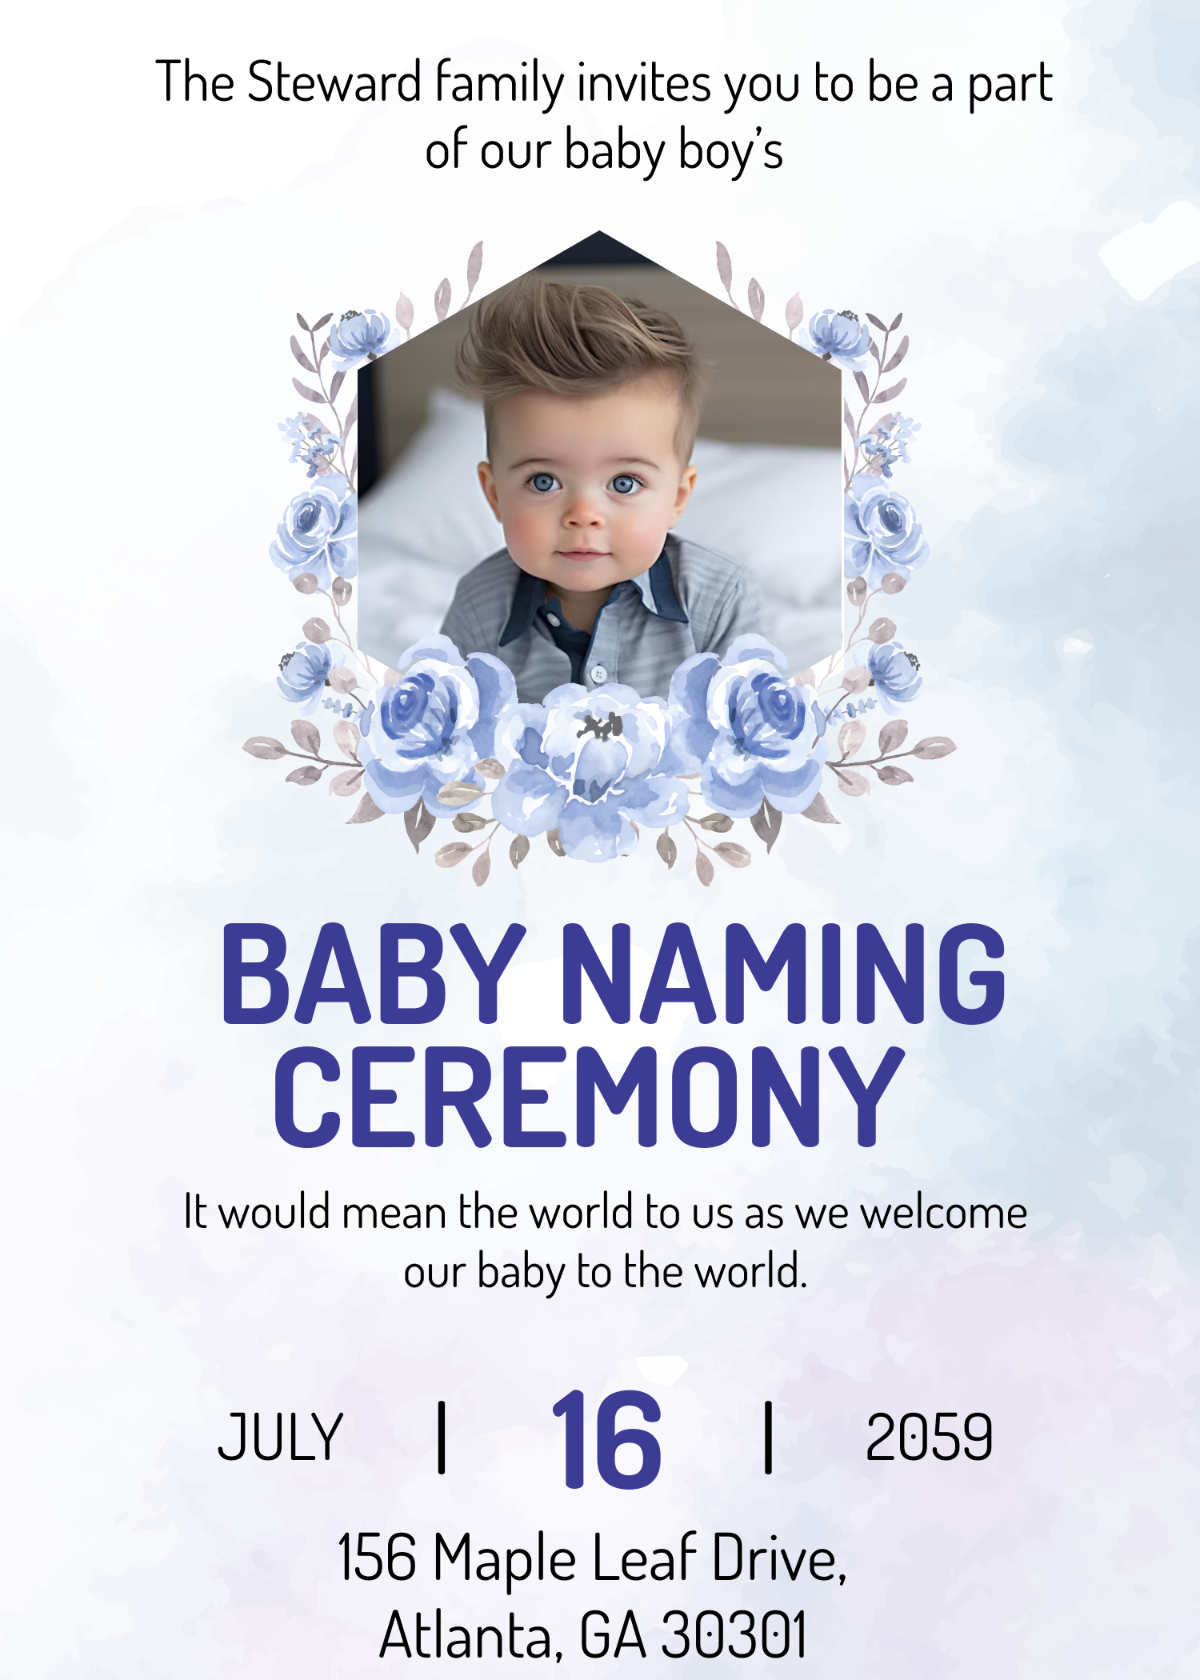 Naming ceremony invitation card for baby boy